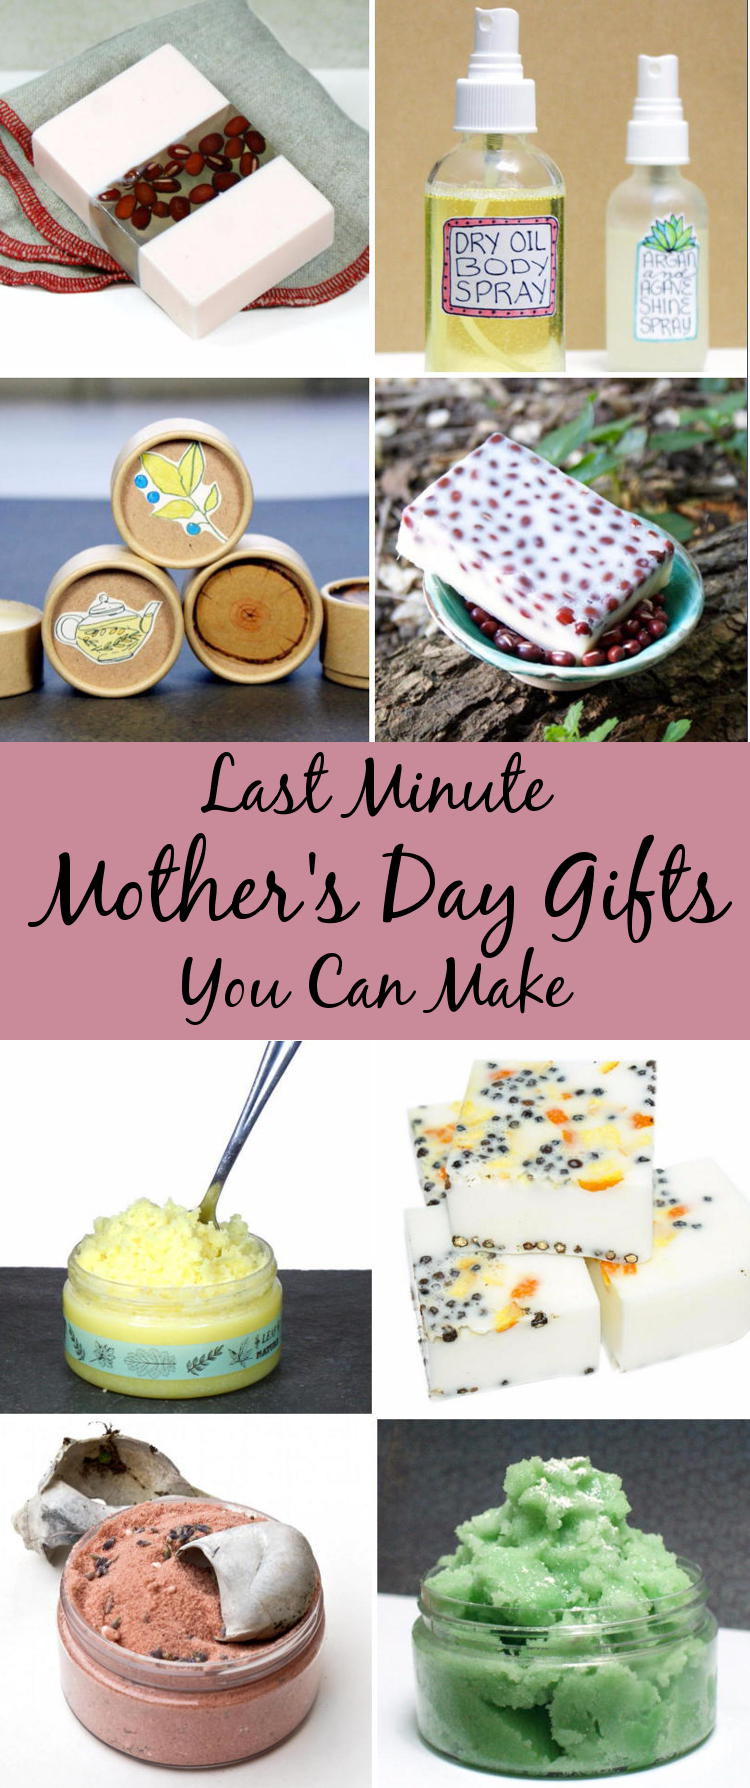 DIY Last Minute Mother'S Day Gifts
 Last Minute Mother s Day Gift Ideas Soap Deli News